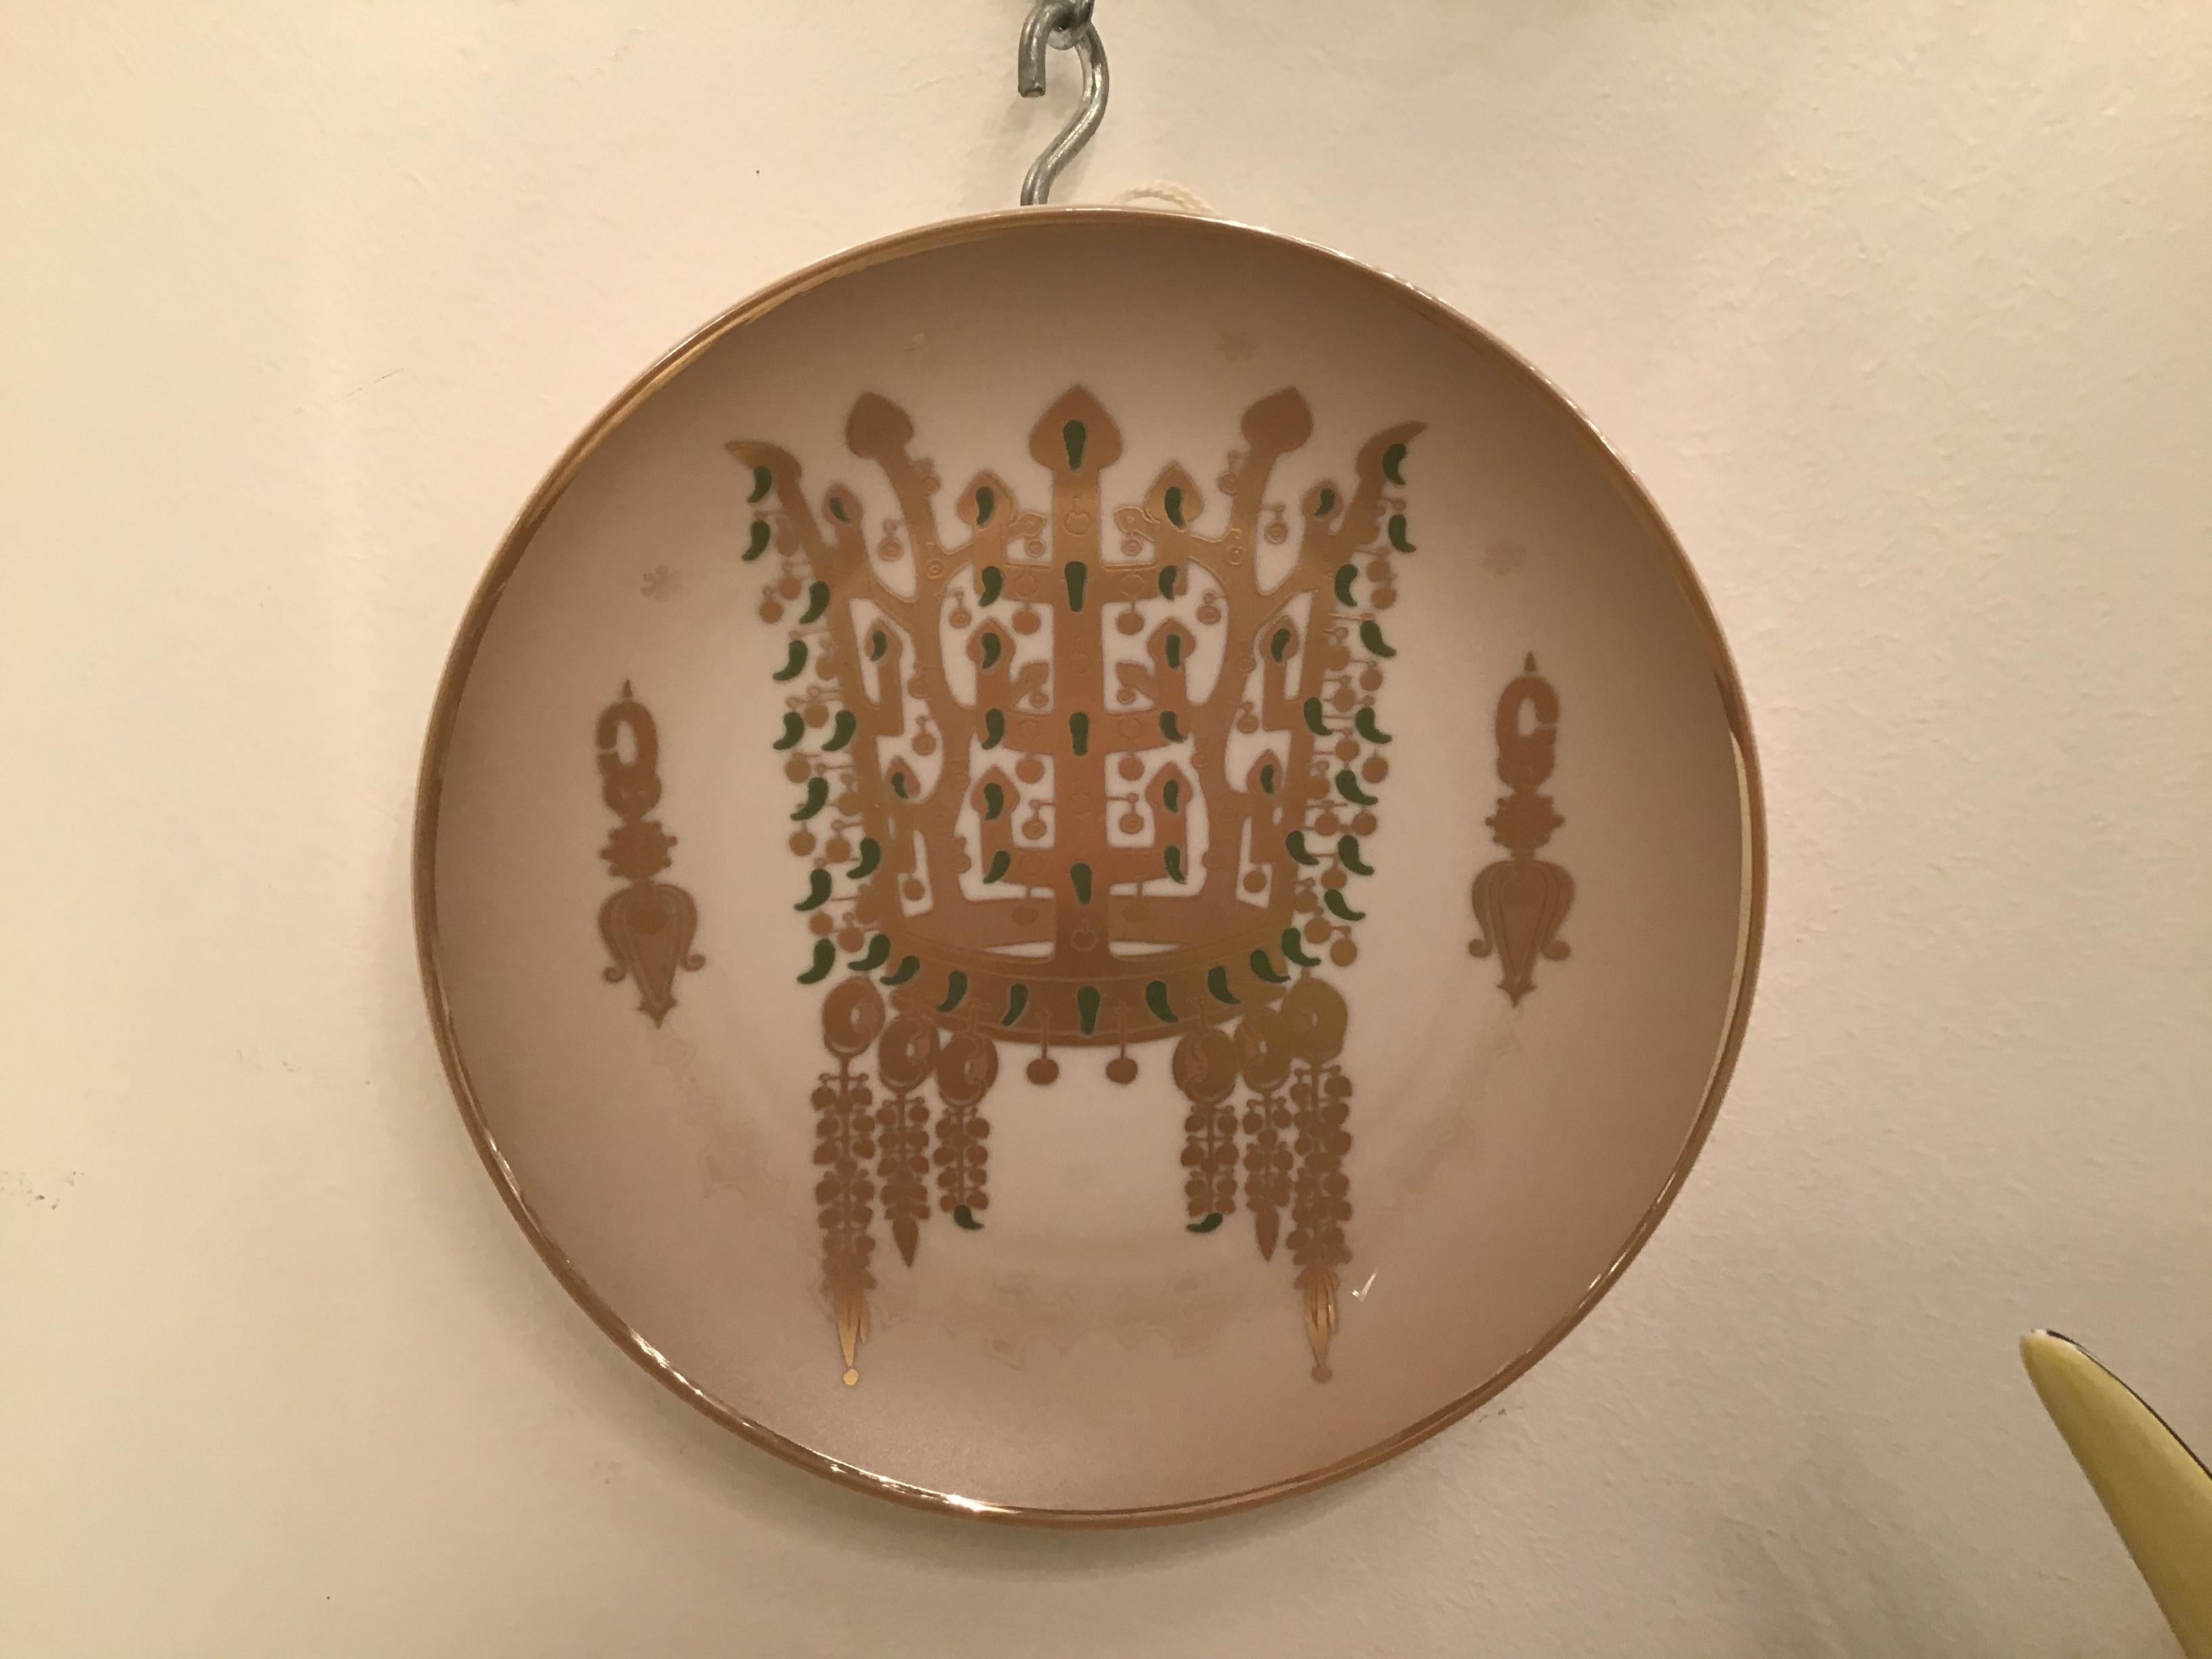 Morbelli Porcelain “Dinastia Silla” Wall Plates Worked with Pure Gold 1960 Italy For Sale 5